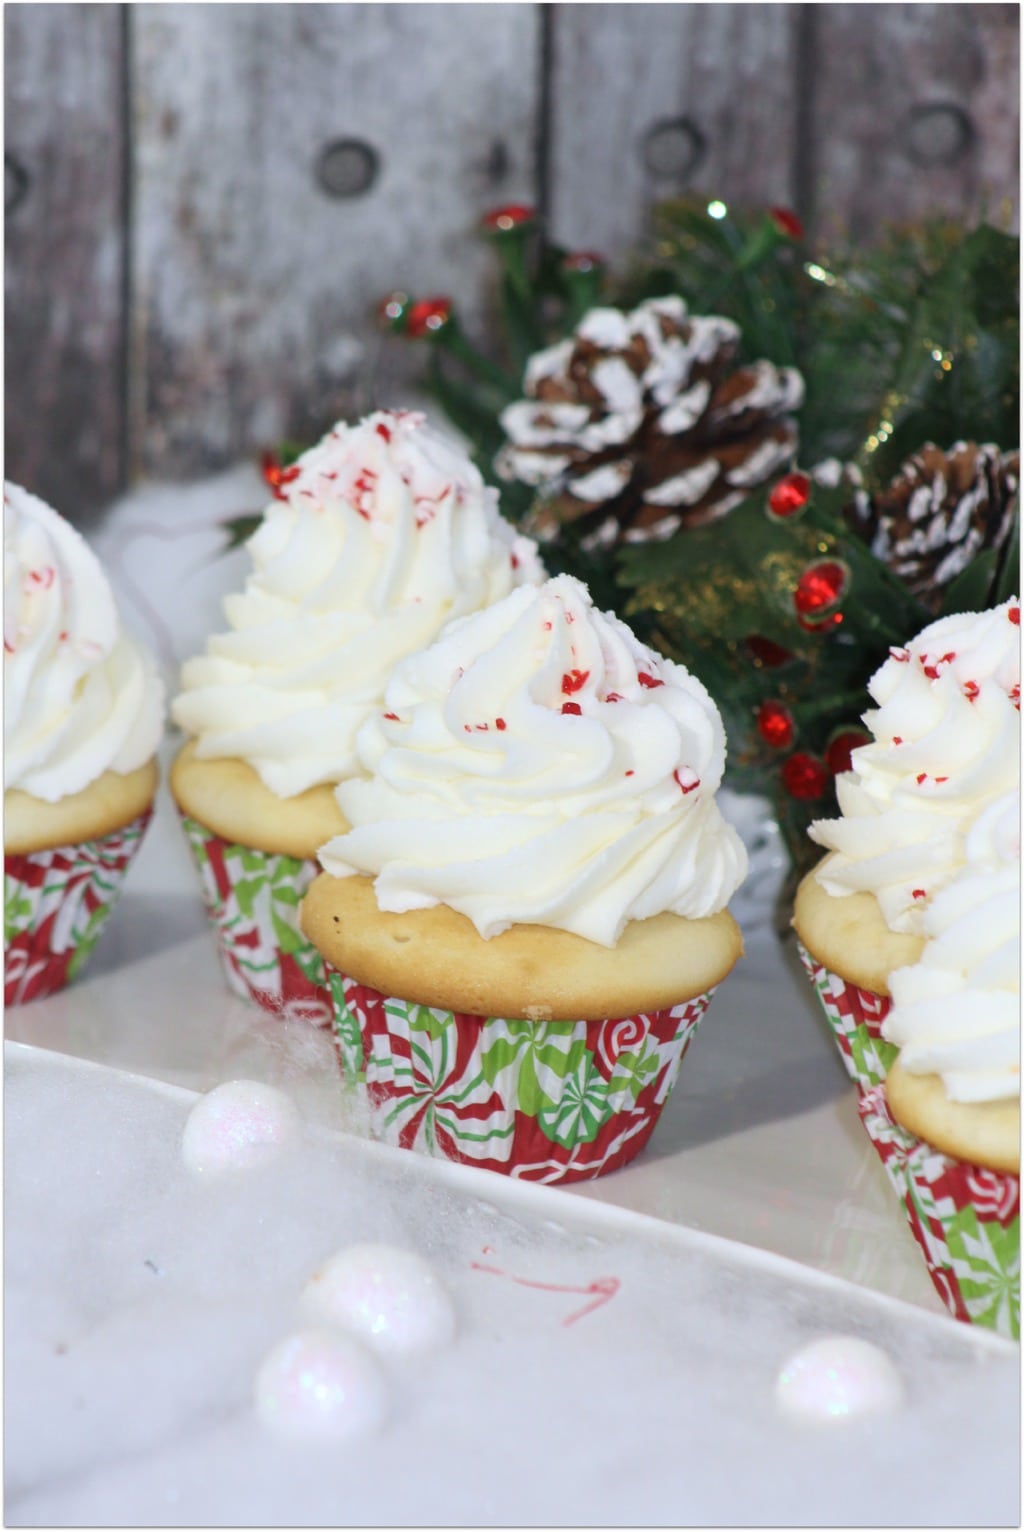 Who wants a Christmas cupcake? I’ve told you before that cupcakes are one of my favorite desserts for parties and celebrations, especially when kids are involved. This is an easy dessert recipe, but the result is just beautiful! As I always say, don’t buy cupcakes when you can DIY! Want to be able to produce a beautiful topping of frosting like you see here? My secret is the Wilton Frosting gun! You won’t believe how easy it is to produce professional looking desserts!